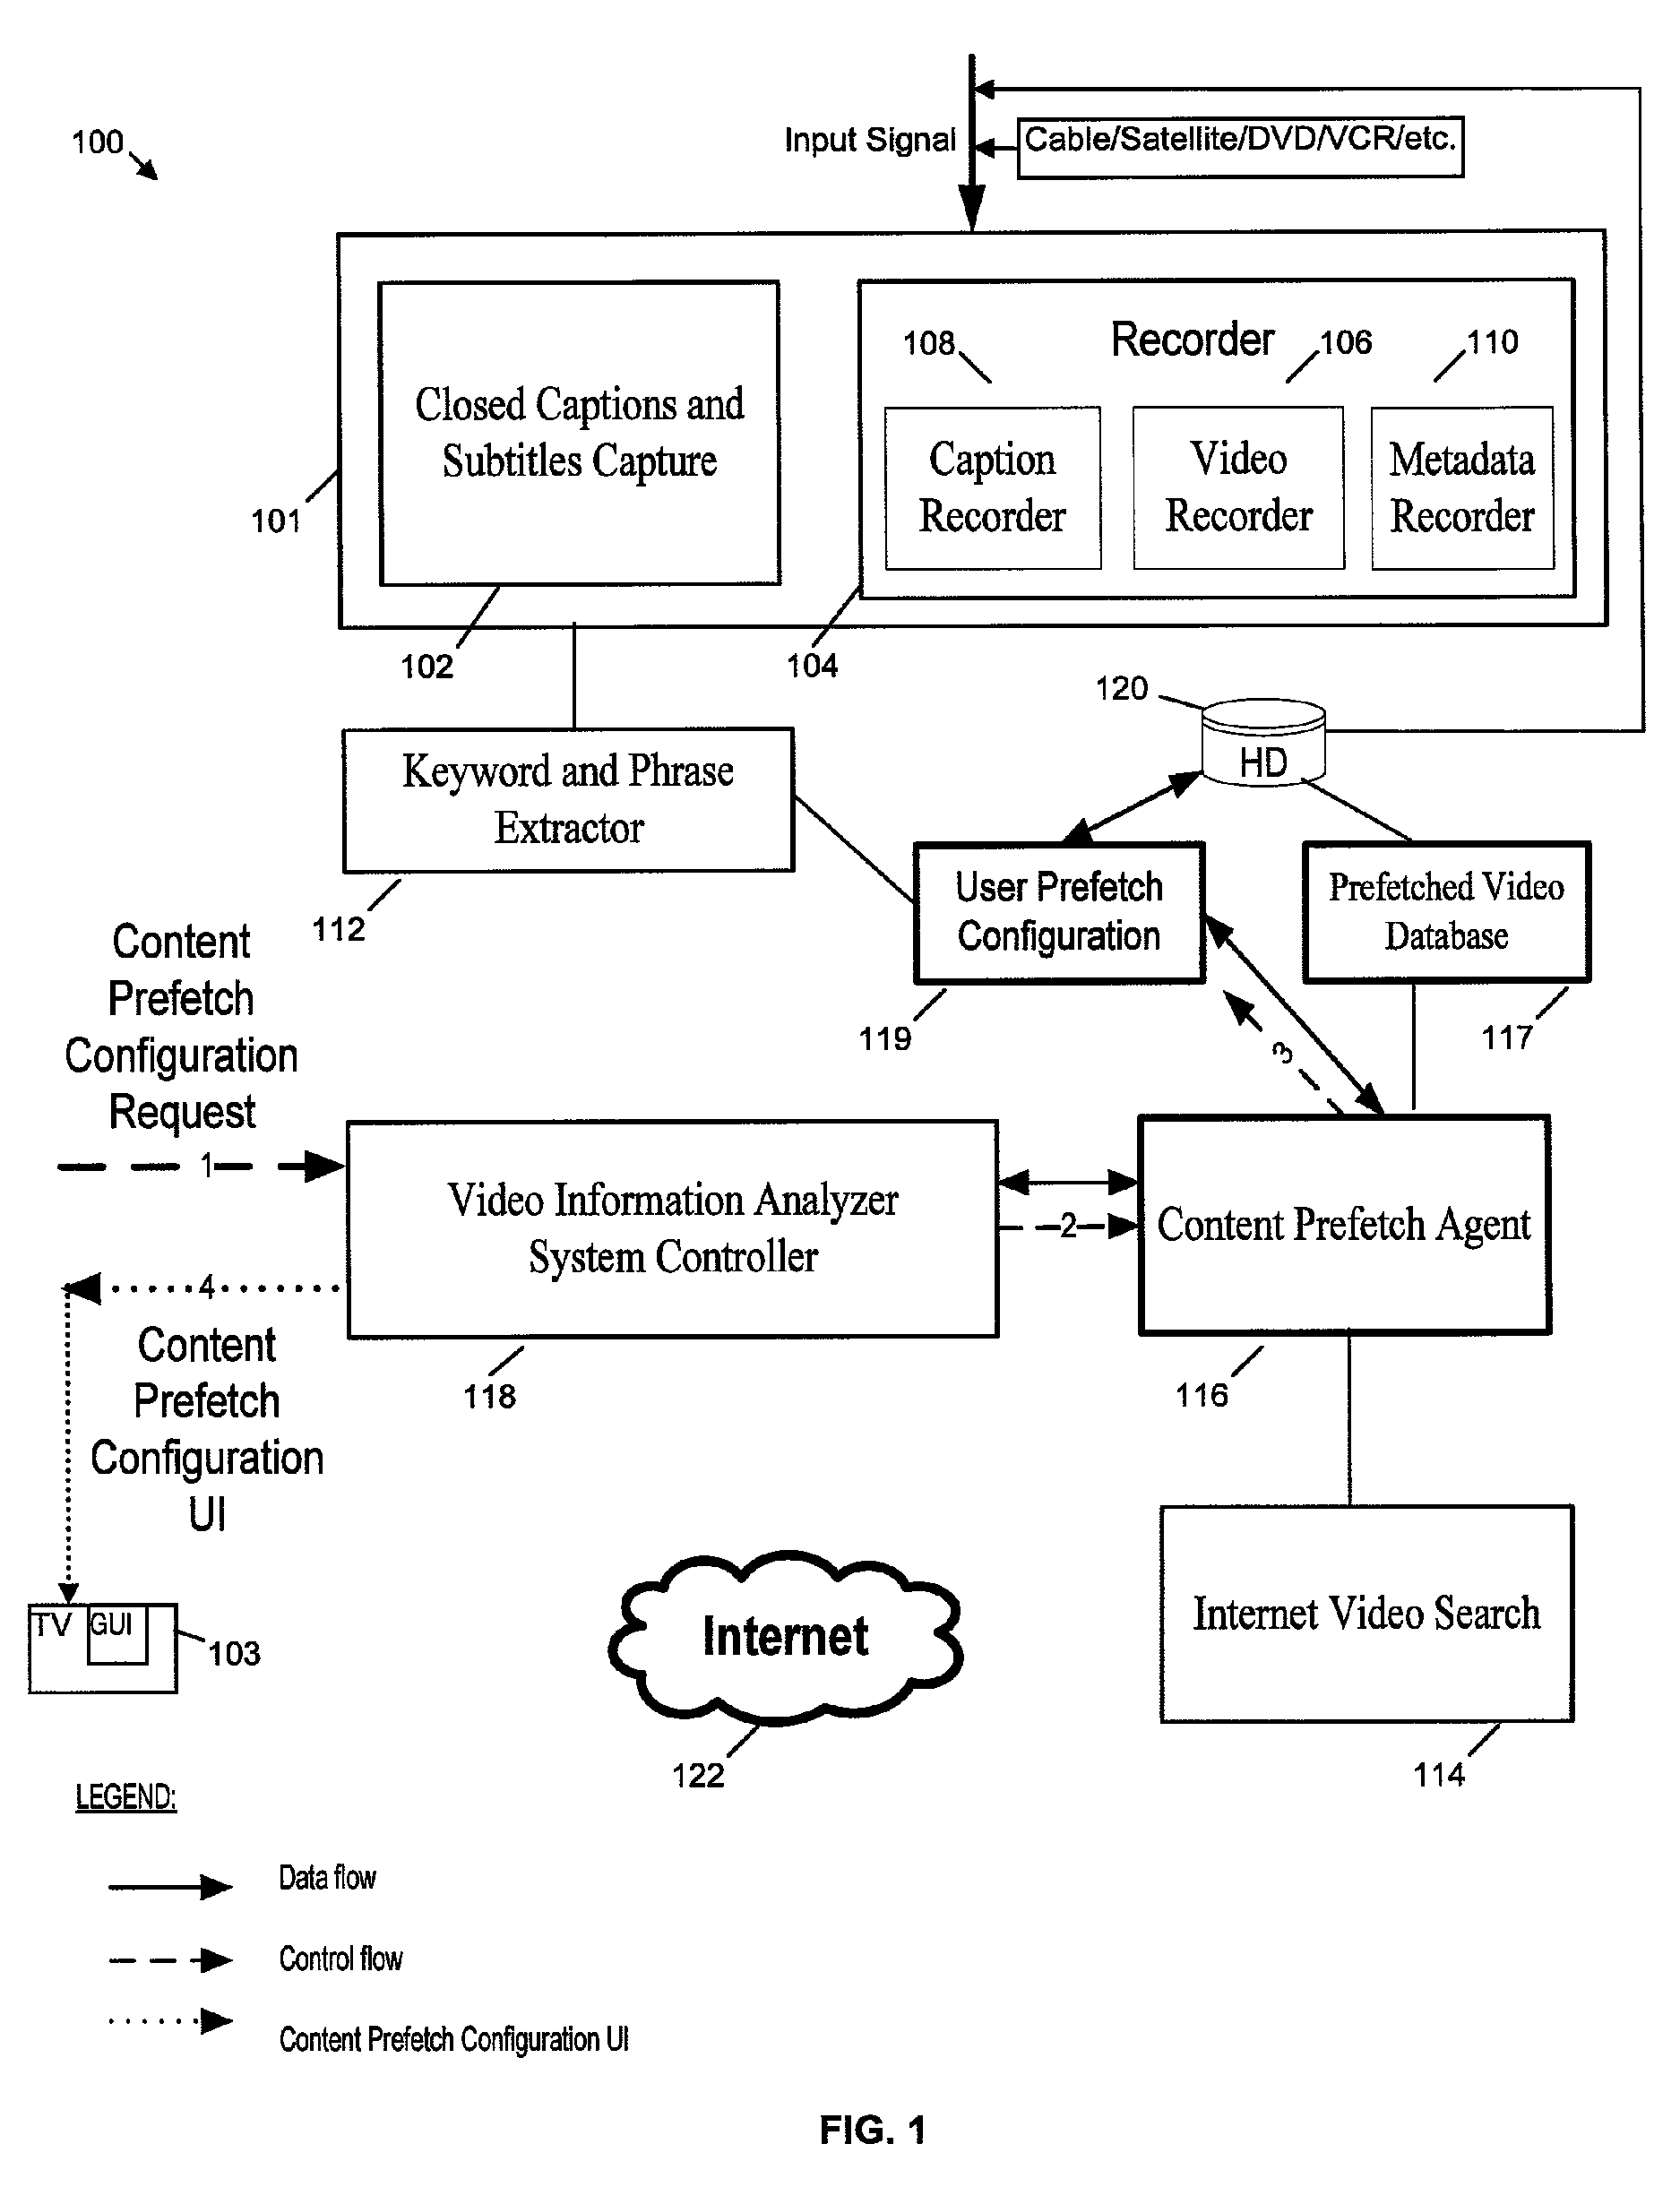 Method and system for prefetching internet content for video recorders